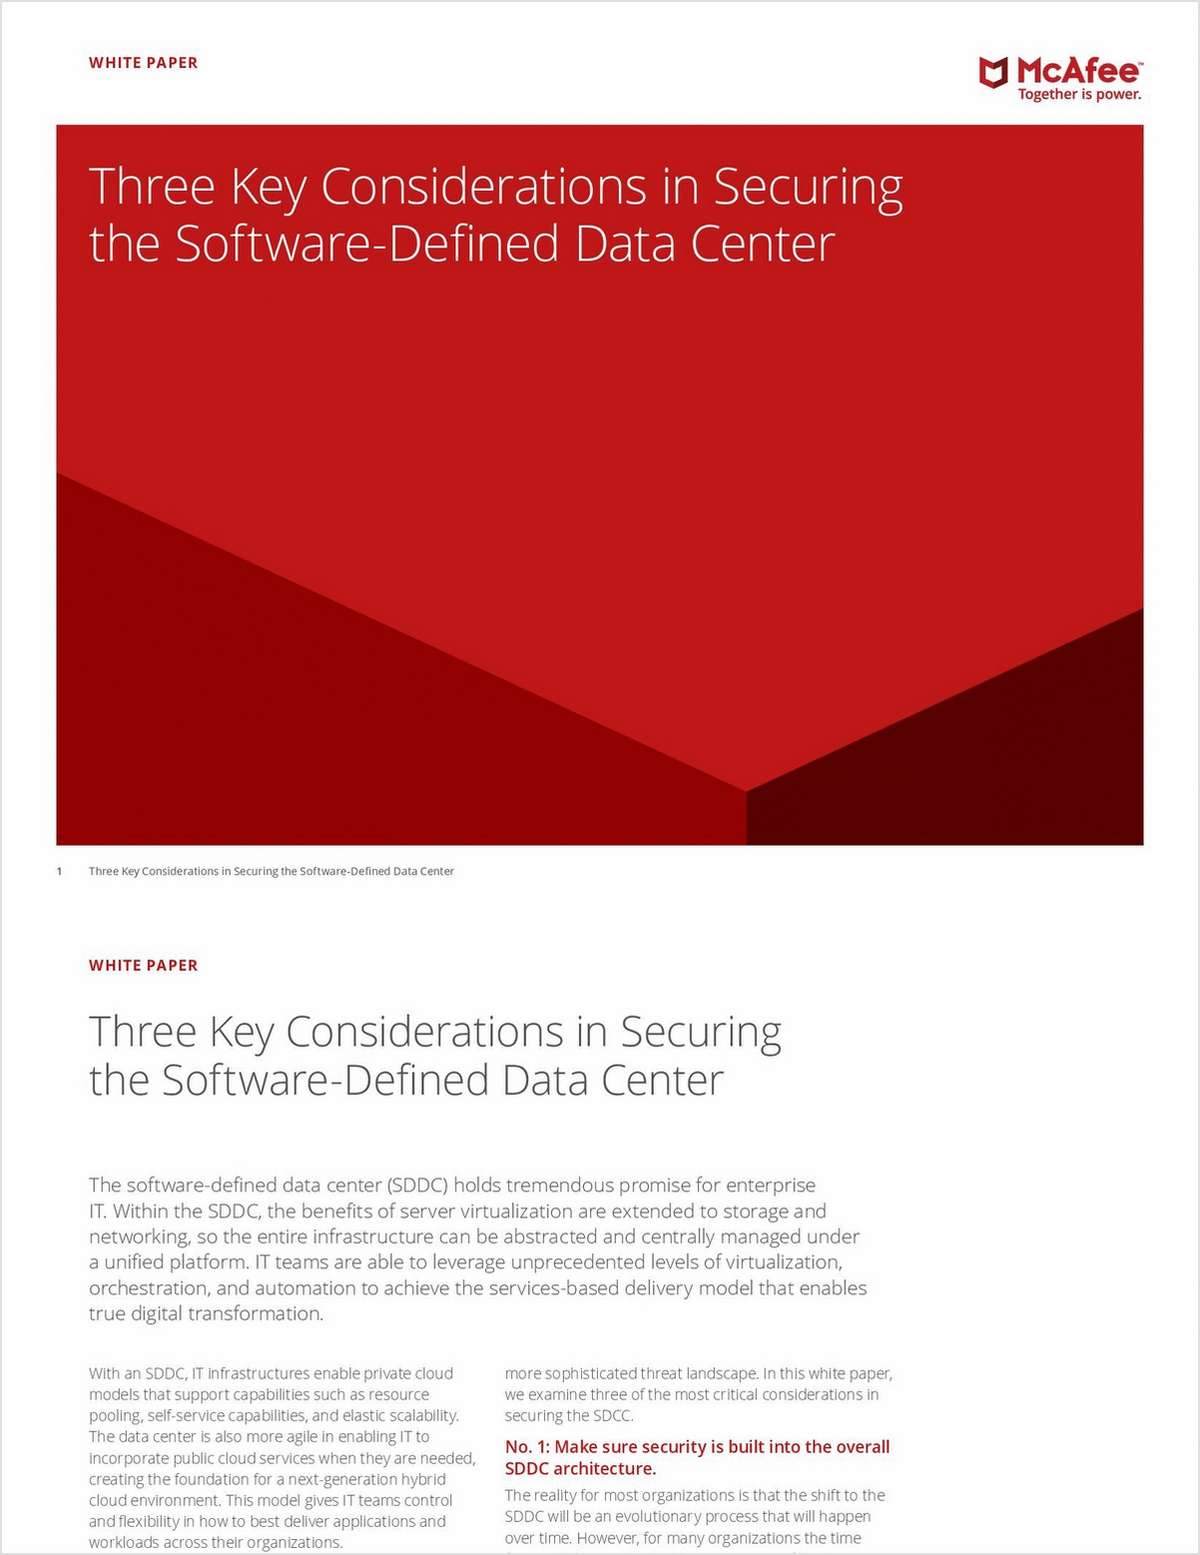 Three Key Considerations in Securing the Software-Defined Data Center